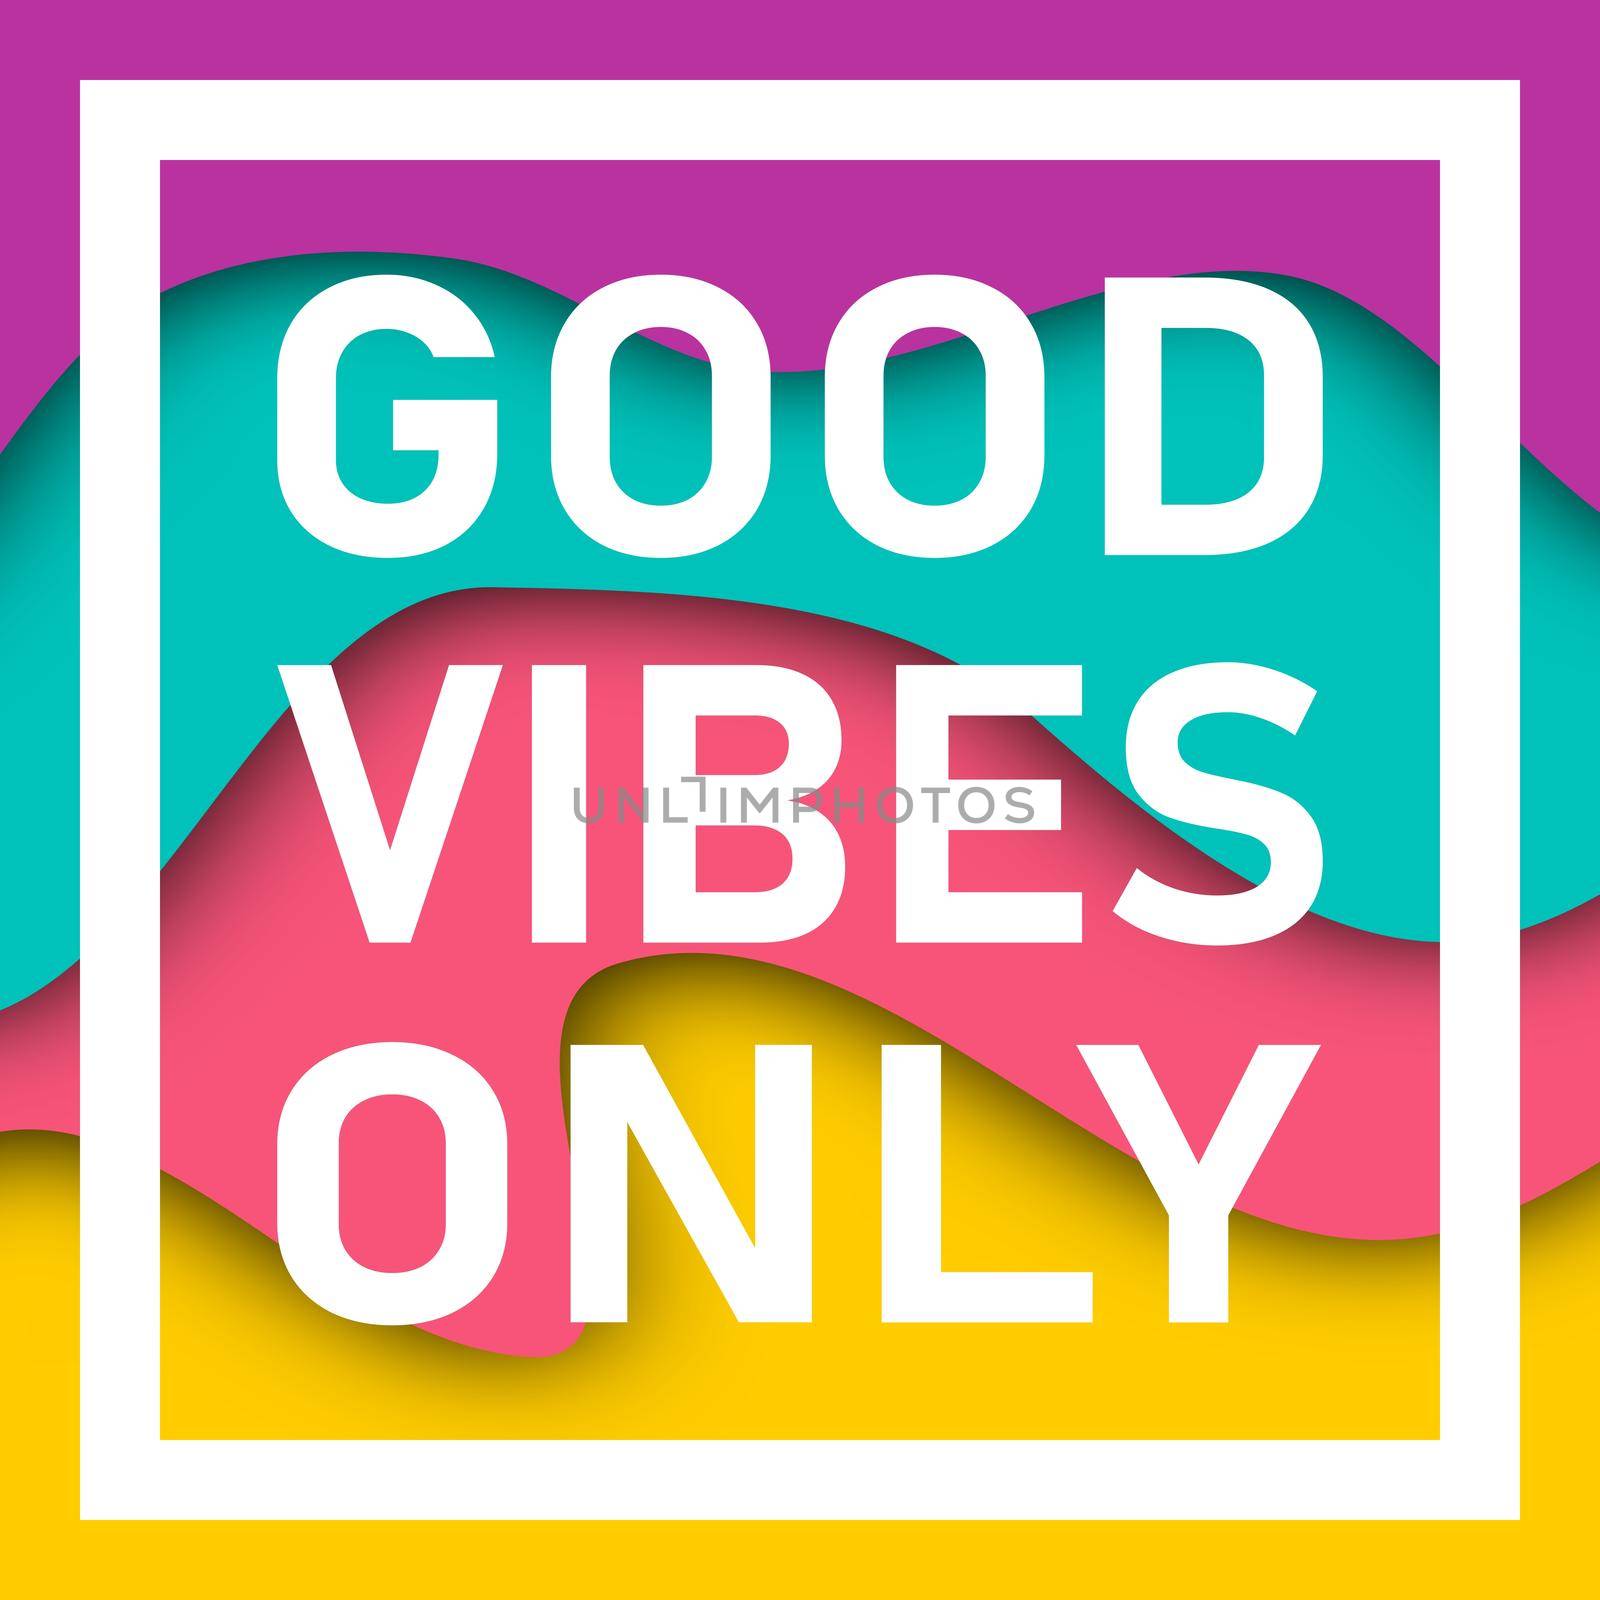 Good Vibes Only quote with papercut background. Inspirational motivational quotes.